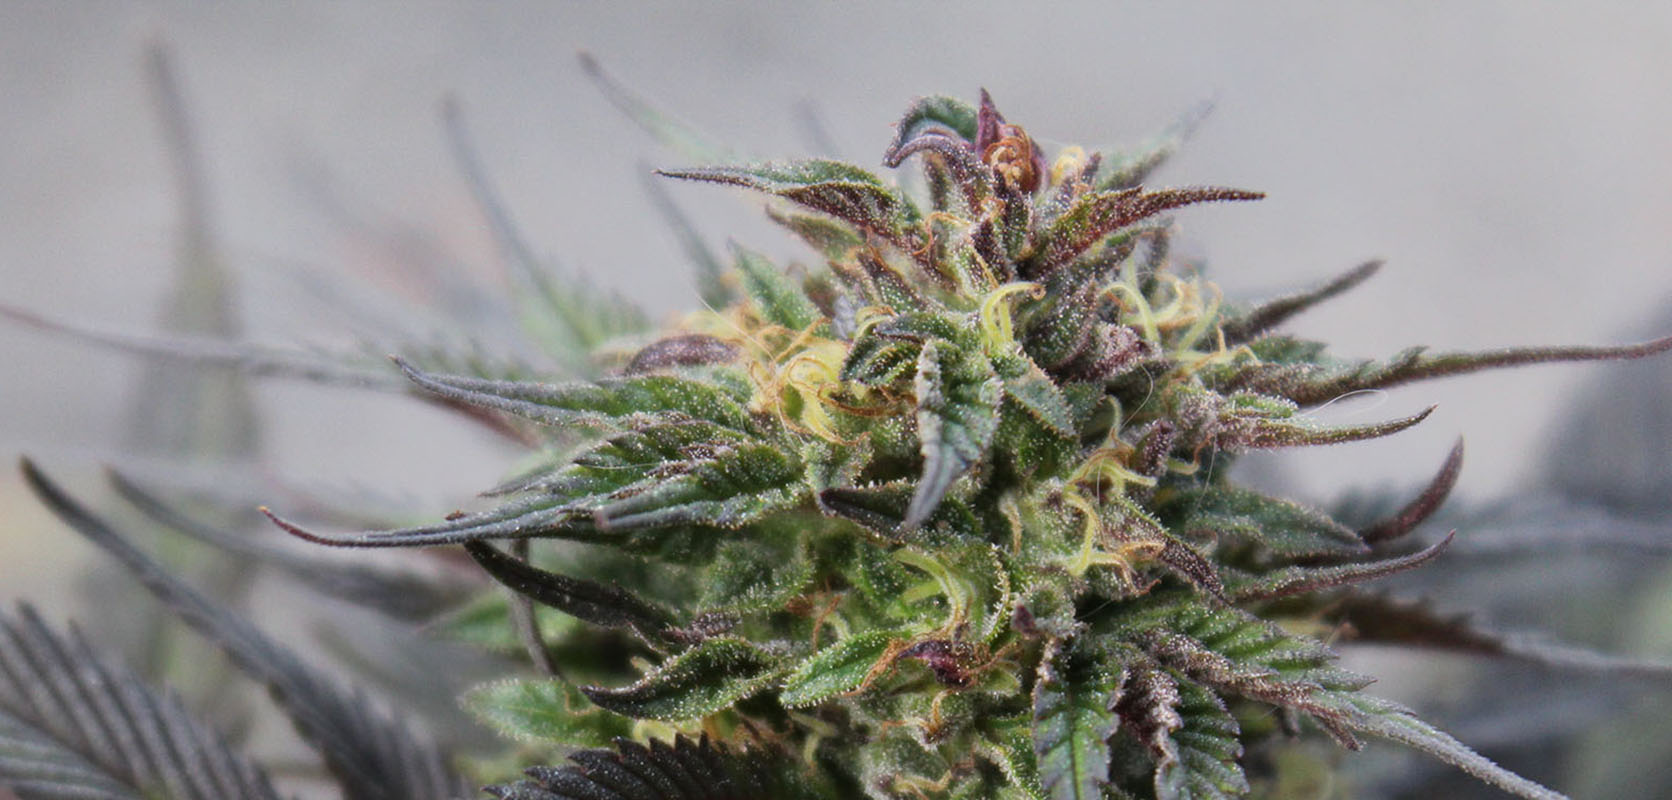 Close up image of Astro Strain cannabis plant from West Coast Cannabis online dispensary in Canada. But Weed Online.